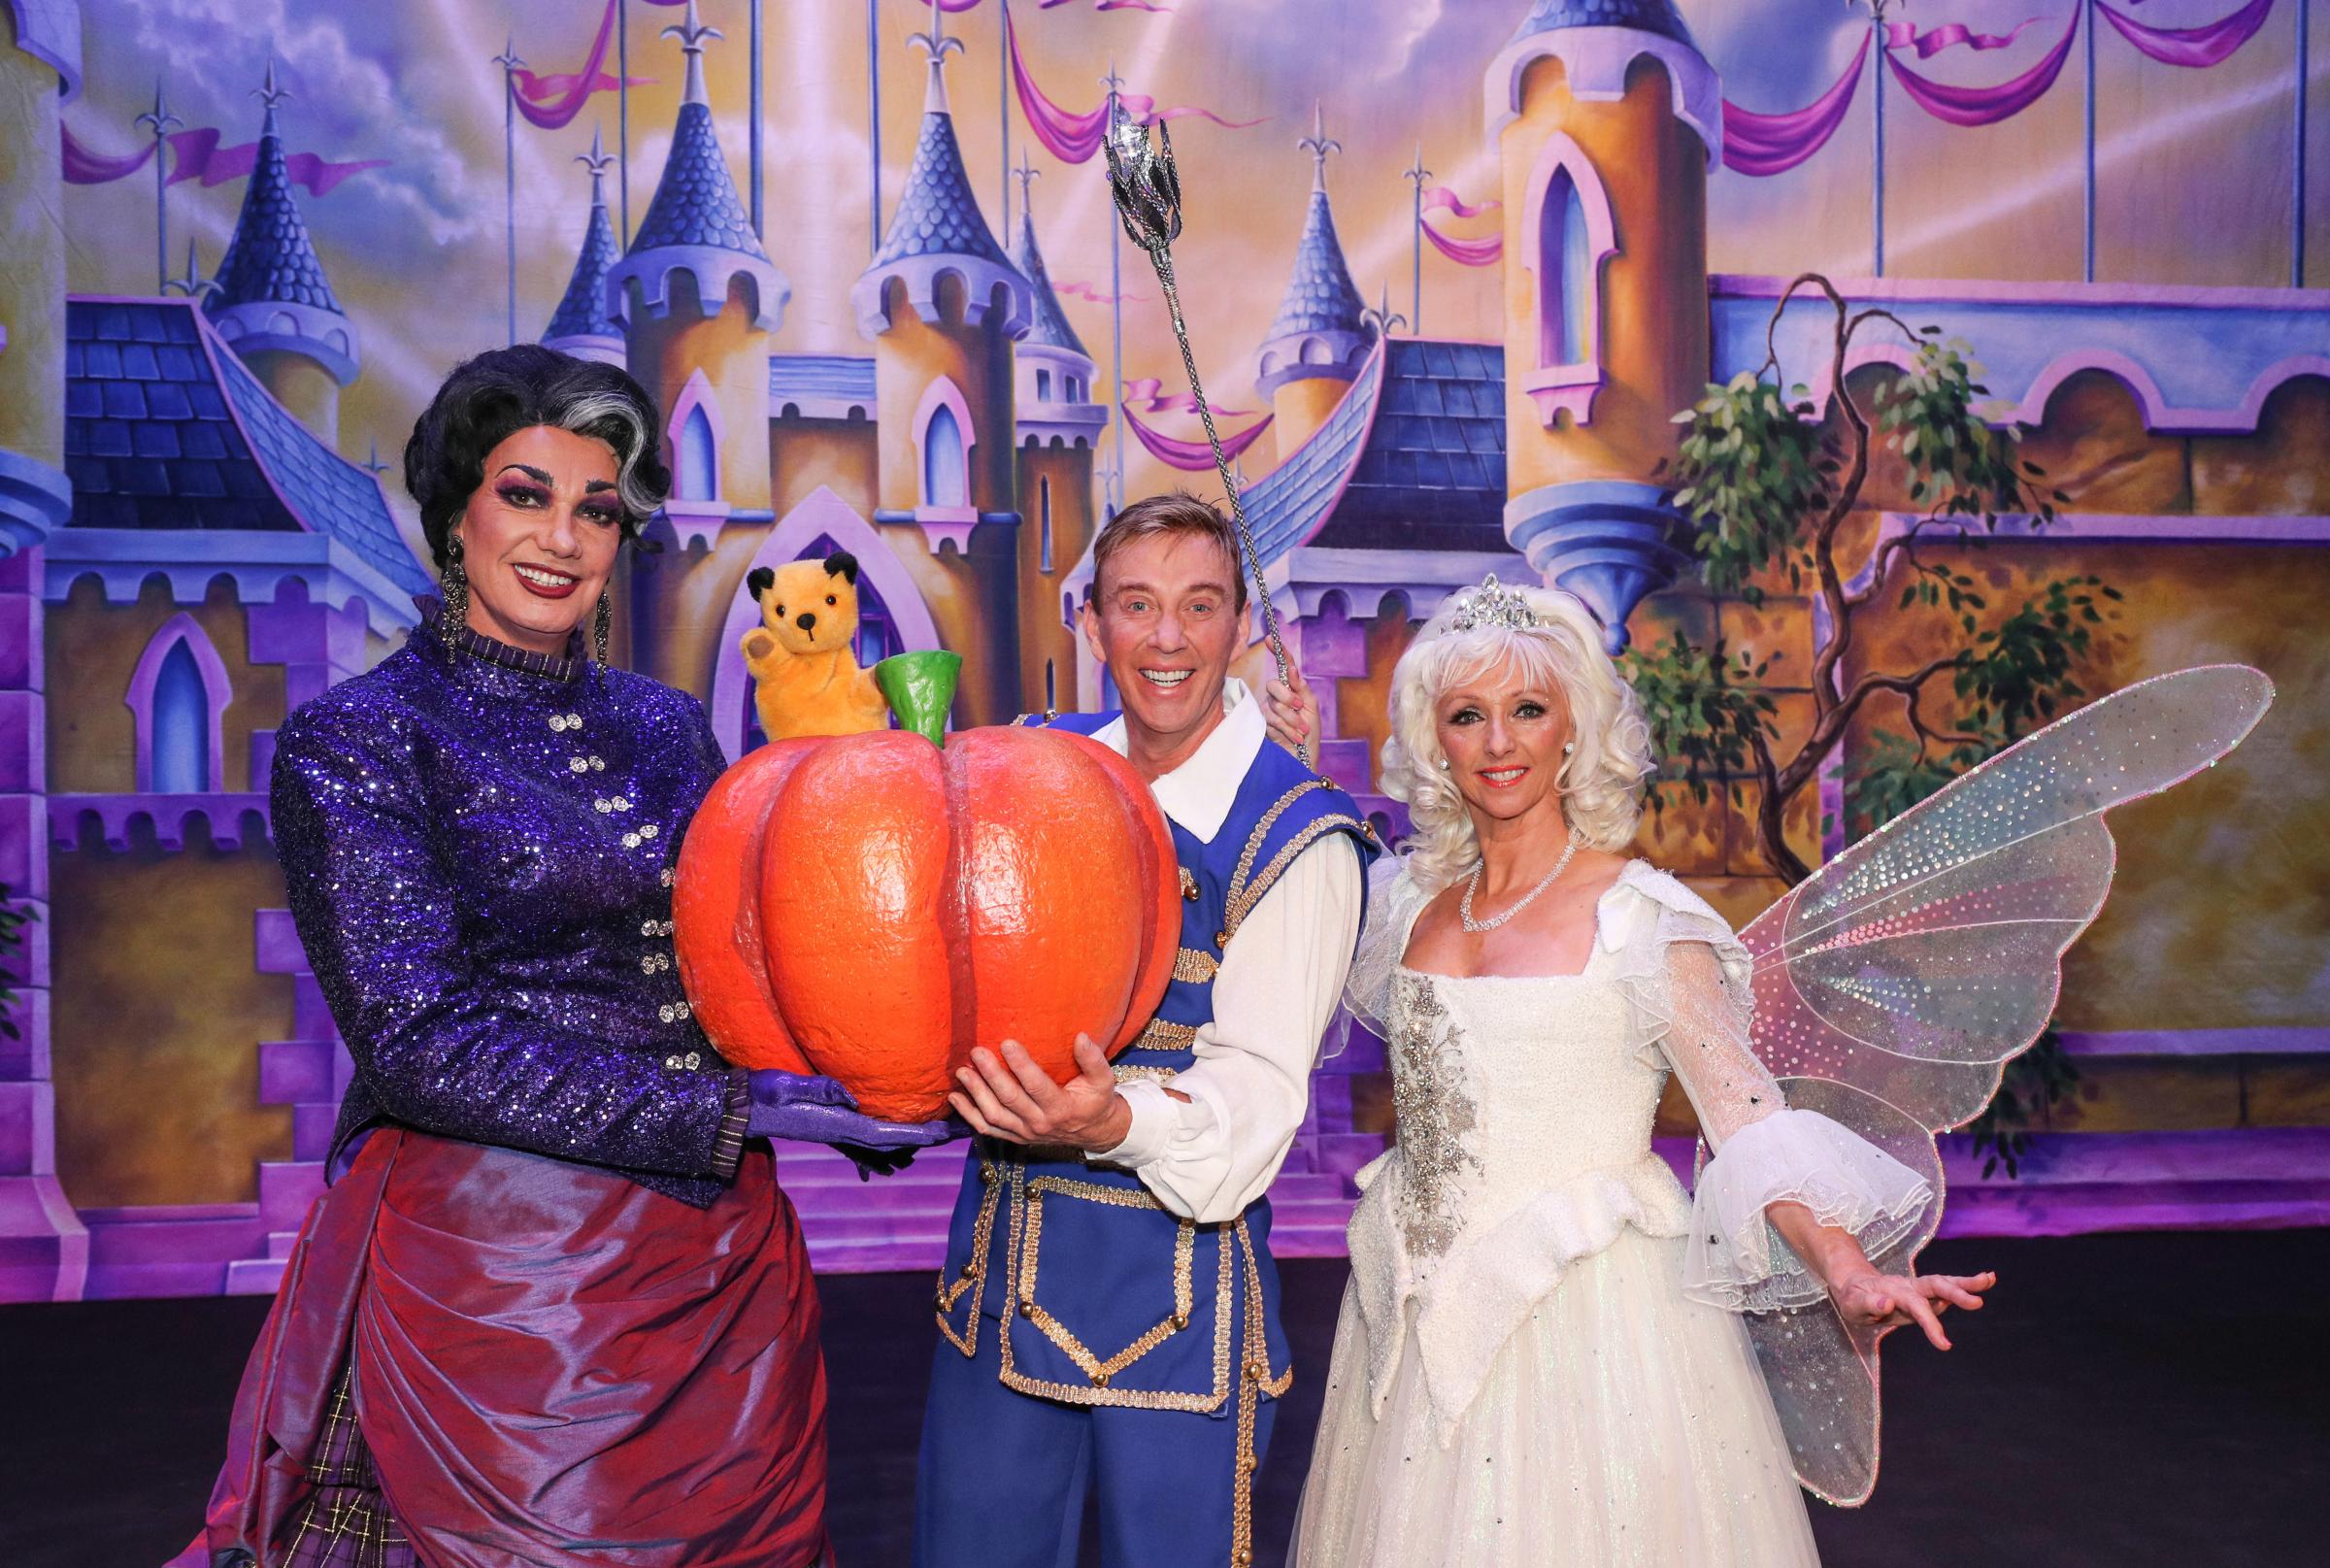 Cinderella Panto at The Mayflower Theatre, staring Craig Revel Horwood, Debbie McGee, Richard Cadell and Sooty..